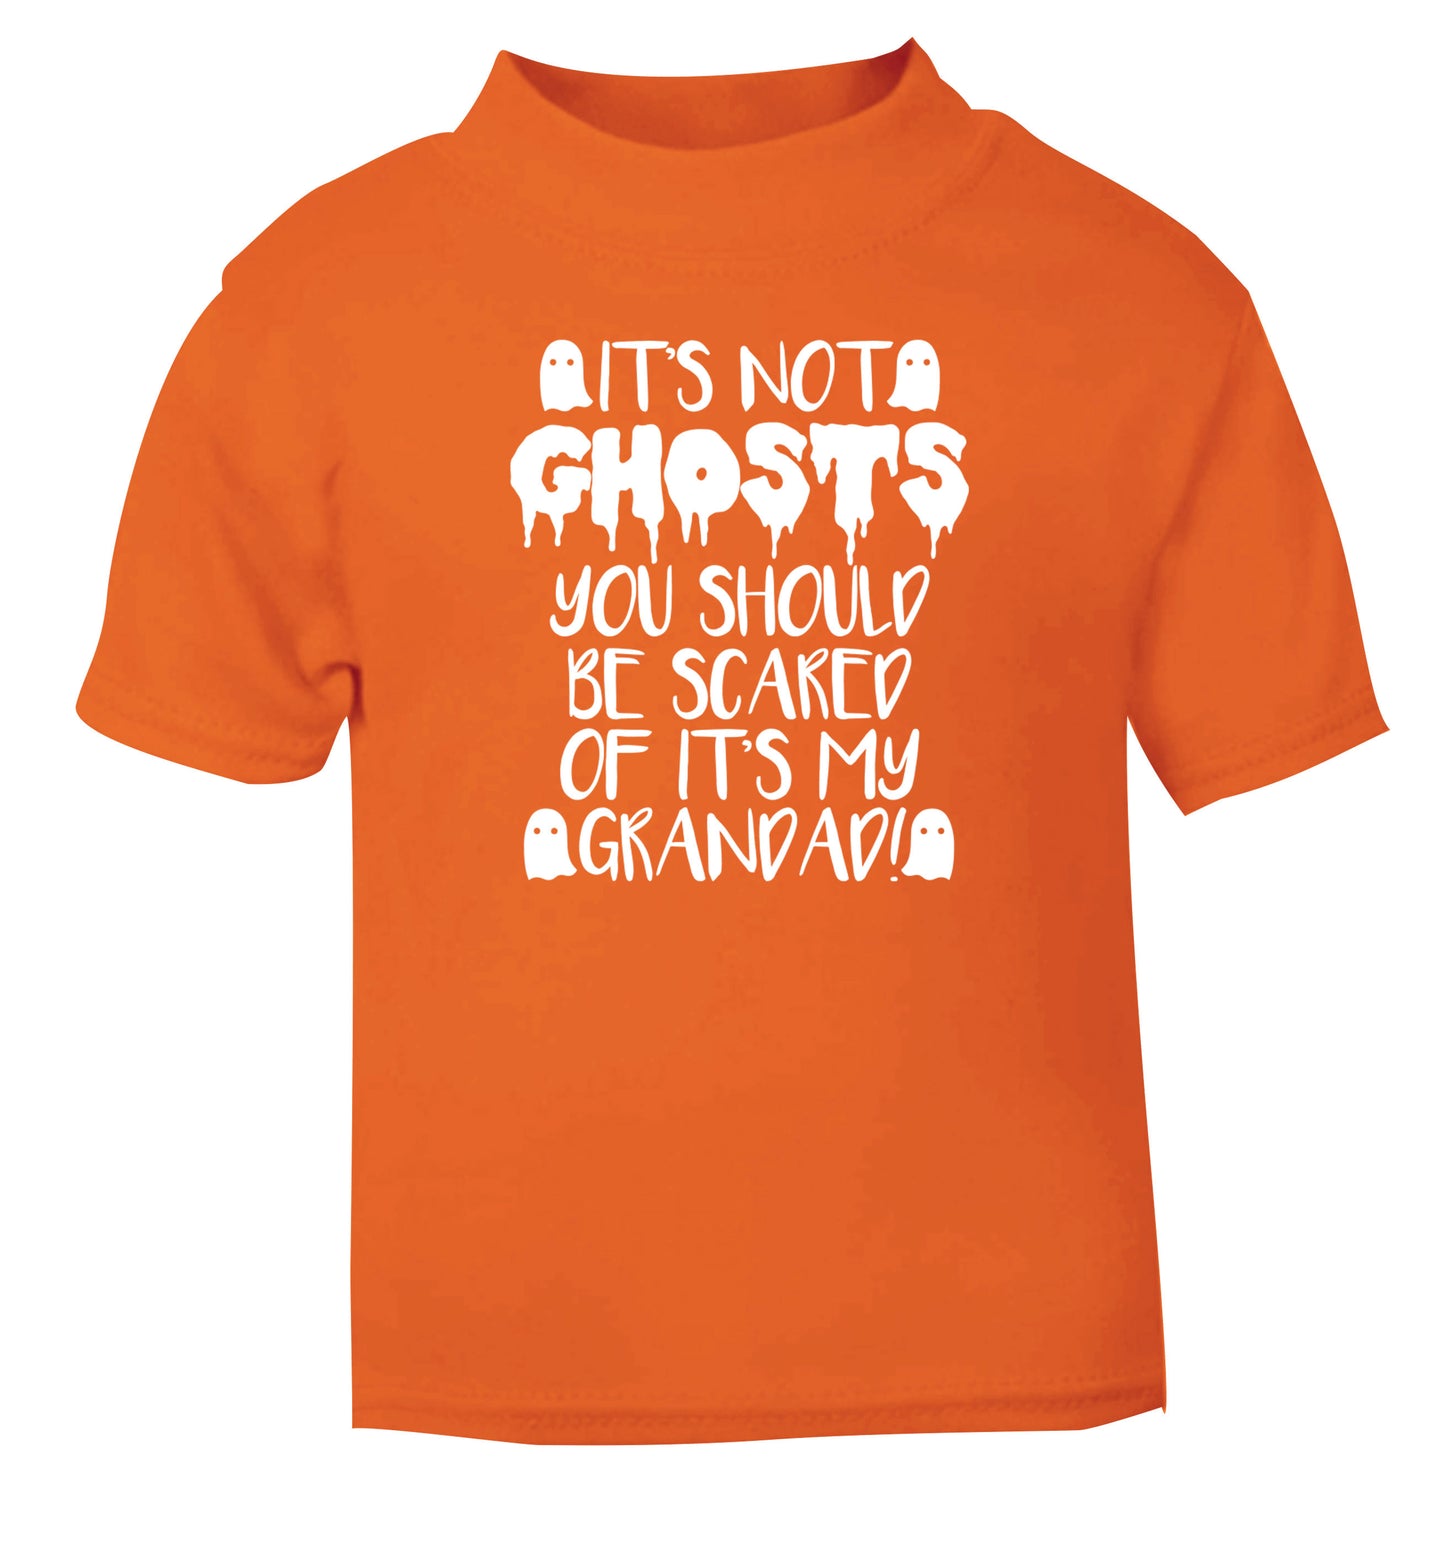 It's not ghosts you should be scared of it's my grandad! orange Baby Toddler Tshirt 2 Years